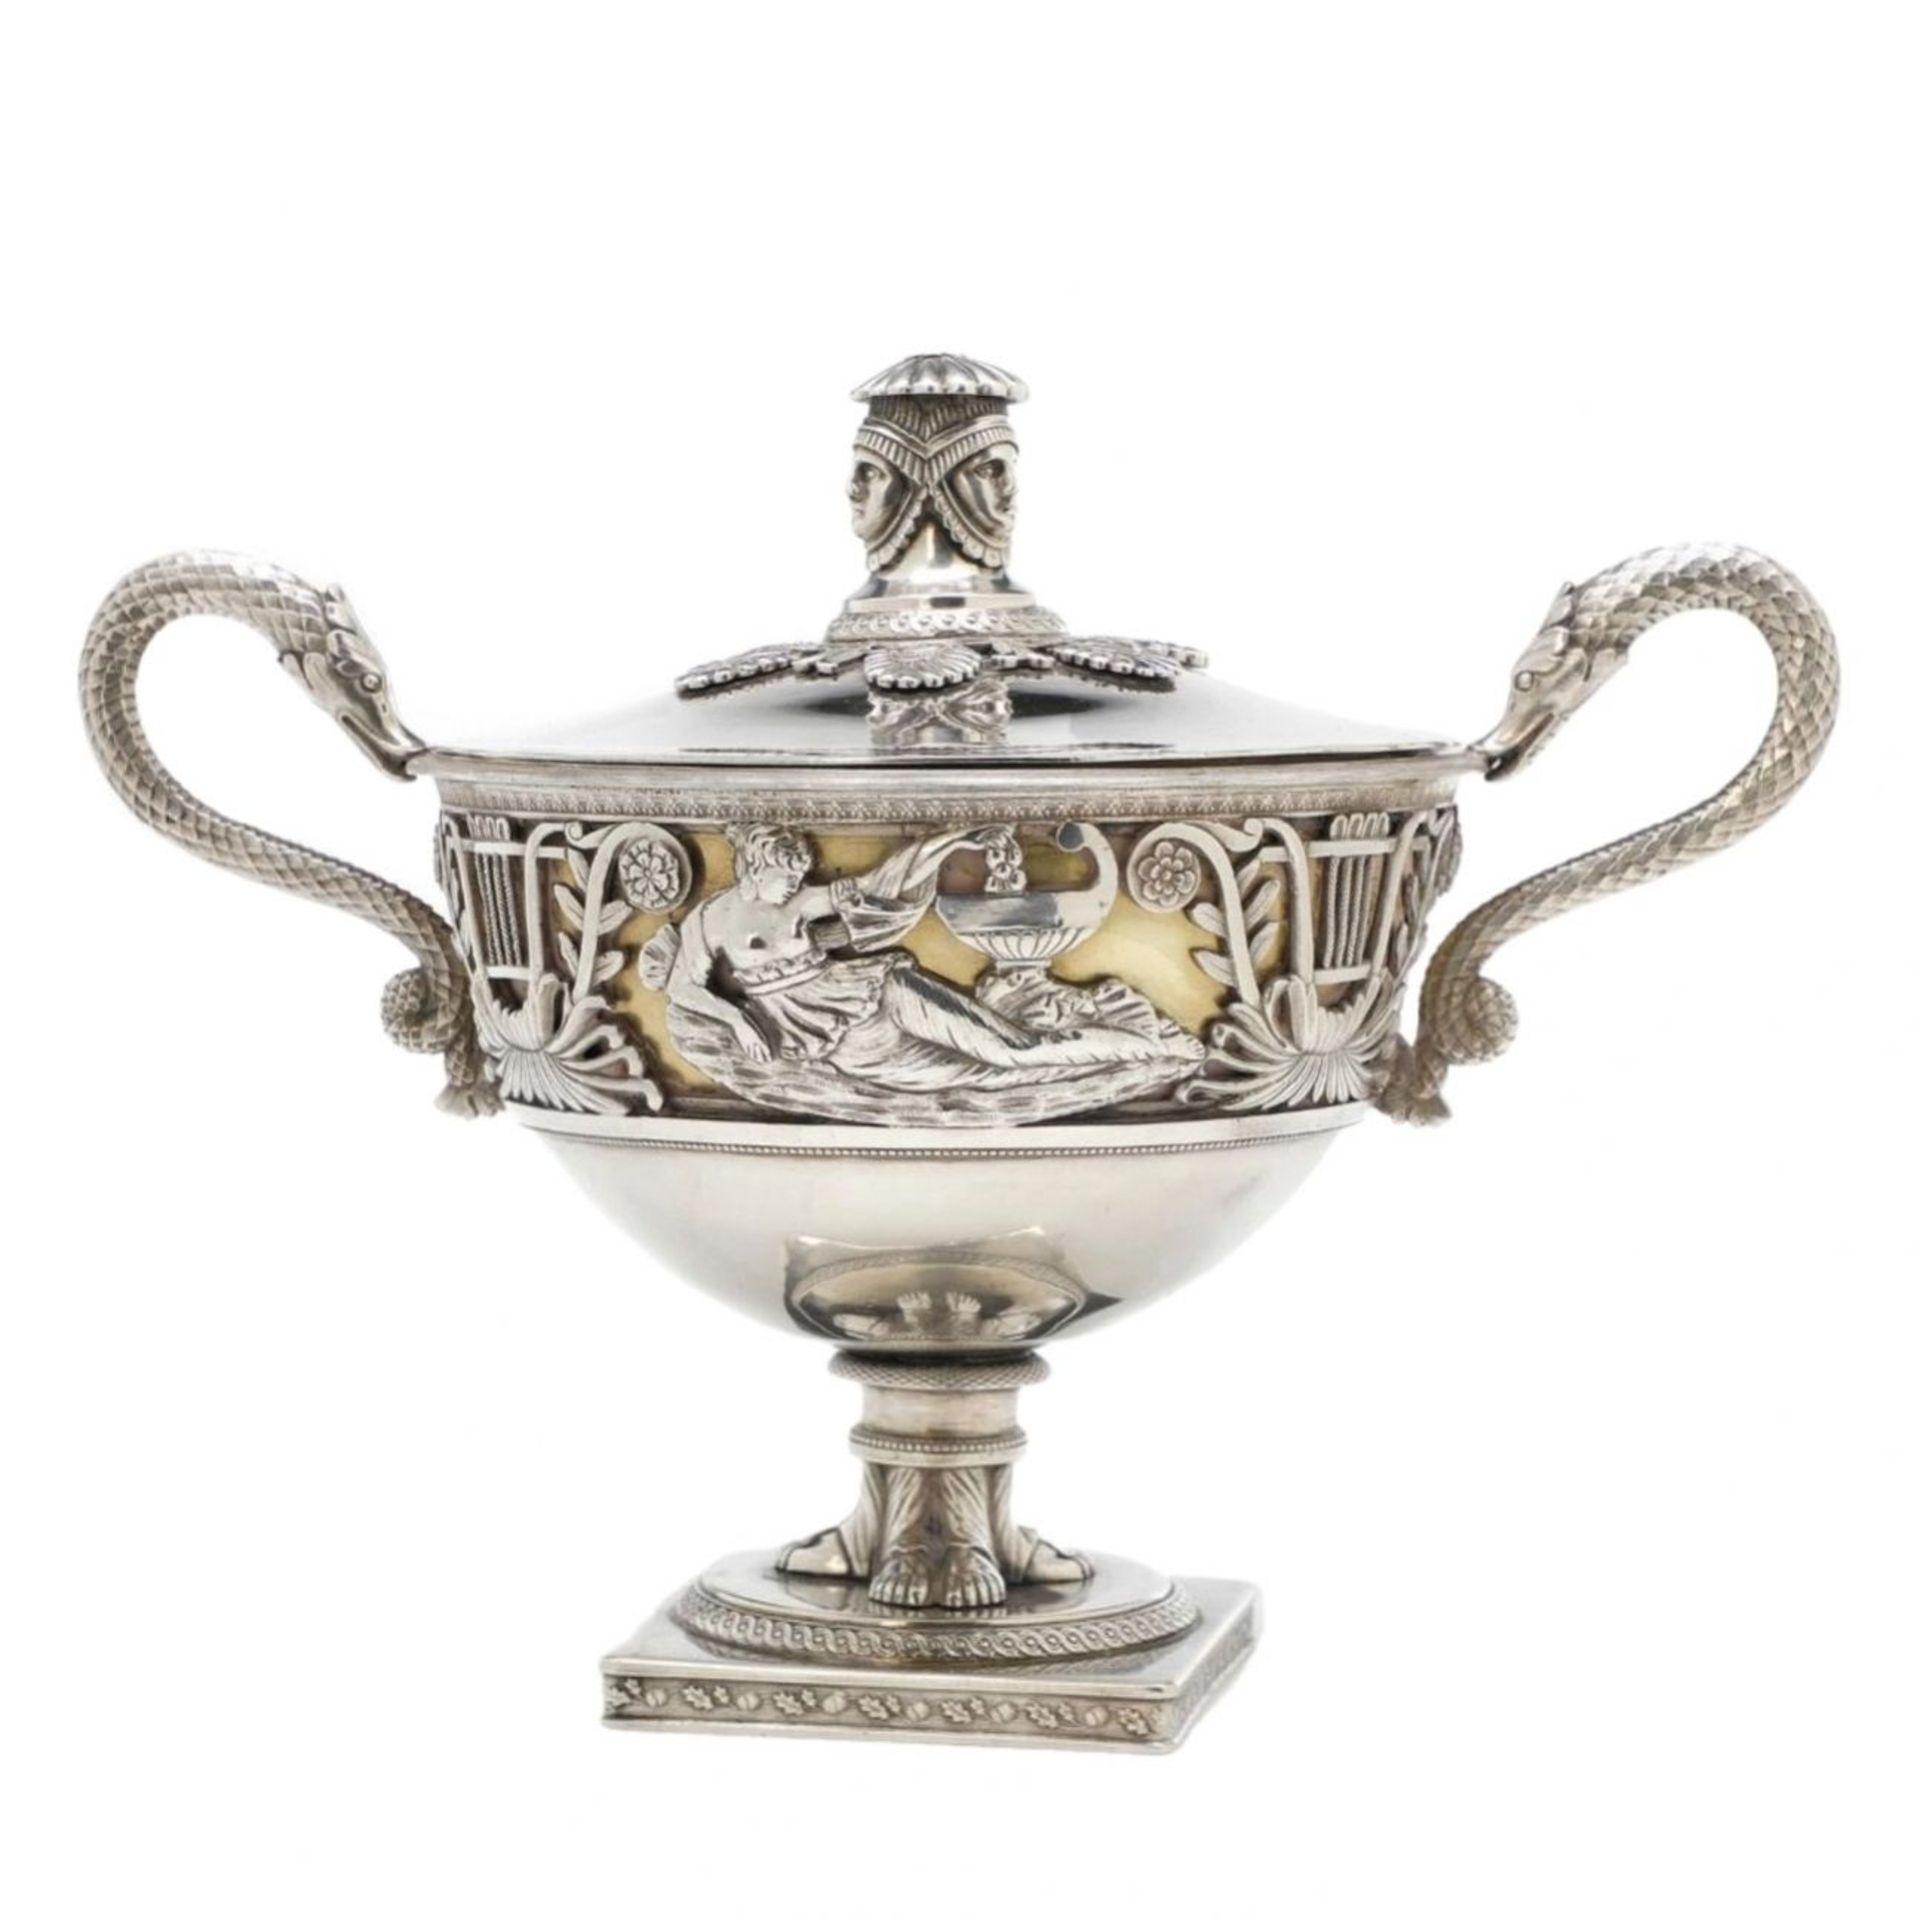 Silver bonbonniere. Russian Empire, St. Petersburg, workshop Axel Hedlund. Turn of the 18-19th c.